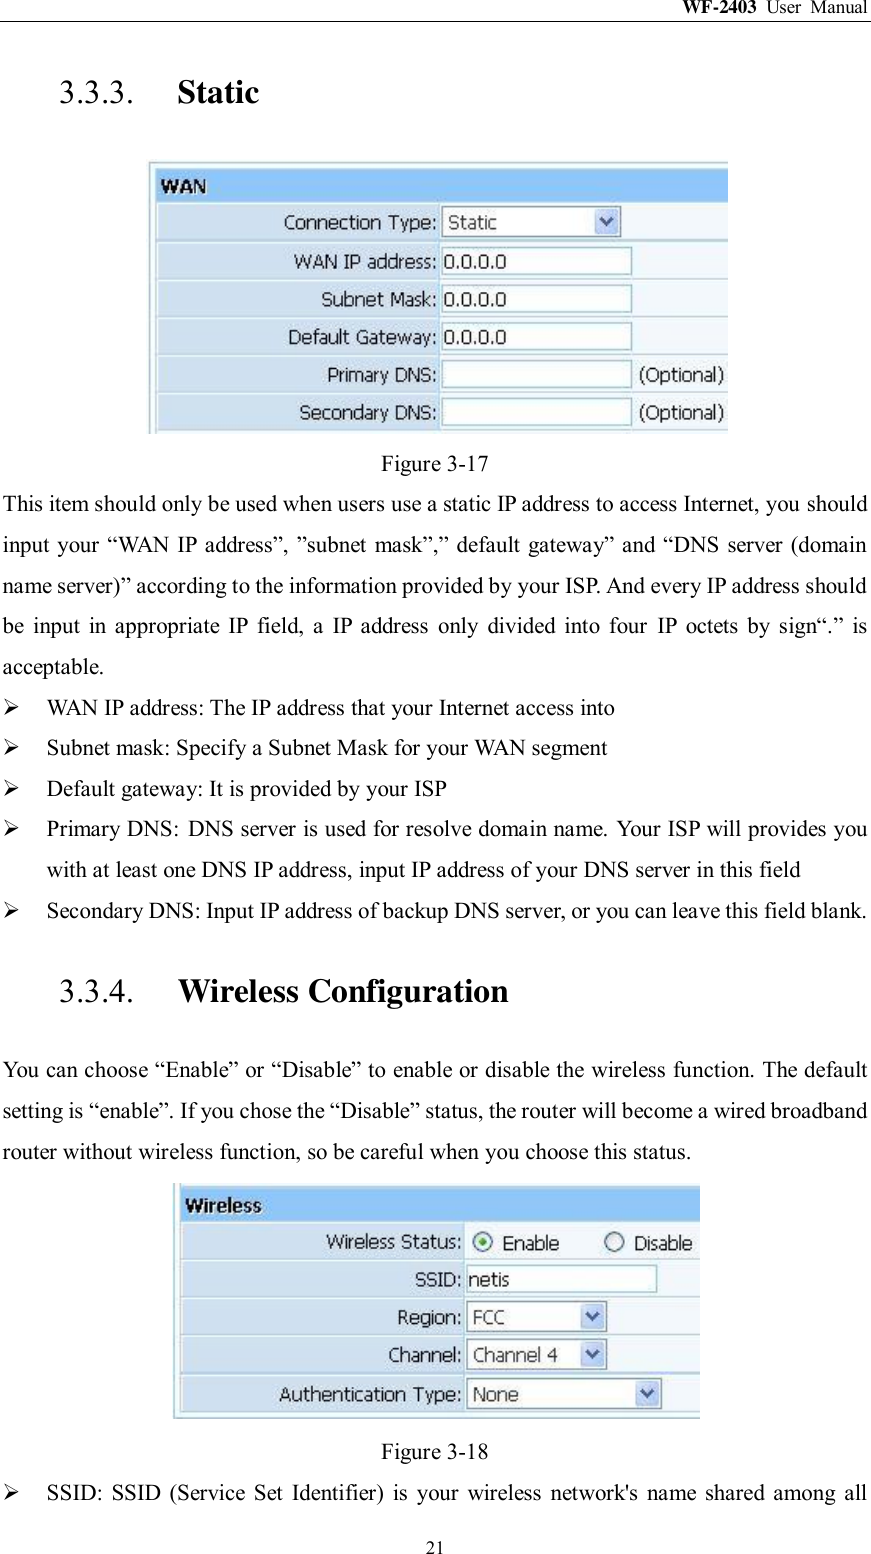 WF-2403  User  Manual  21 3.3.3. Static  Figure 3-17 This item should only be used when users use a static IP address to access Internet, you should input your “WAN IP address”, ”subnet mask”,” default gateway” and “DNS server (domain name server)” according to the information provided by your ISP. And every IP address should be  input  in  appropriate  IP  field,  a  IP  address  only  divided  into  four  IP  octets  by  sign“.”  is acceptable.  WAN IP address: The IP address that your Internet access into  Subnet mask: Specify a Subnet Mask for your WAN segment  Default gateway: It is provided by your ISP  Primary DNS:  DNS server is used for resolve domain name. Your ISP will provides you with at least one DNS IP address, input IP address of your DNS server in this field  Secondary DNS: Input IP address of backup DNS server, or you can leave this field blank. 3.3.4. Wireless Configuration You can choose “Enable” or “Disable” to enable or disable the wireless function. The default setting is “enable”. If you chose the “Disable” status, the router will become a wired broadband router without wireless function, so be careful when you choose this status.  Figure 3-18  SSID:  SSID  (Service  Set  Identifier)  is  your  wireless  network&apos;s  name  shared  among  all 